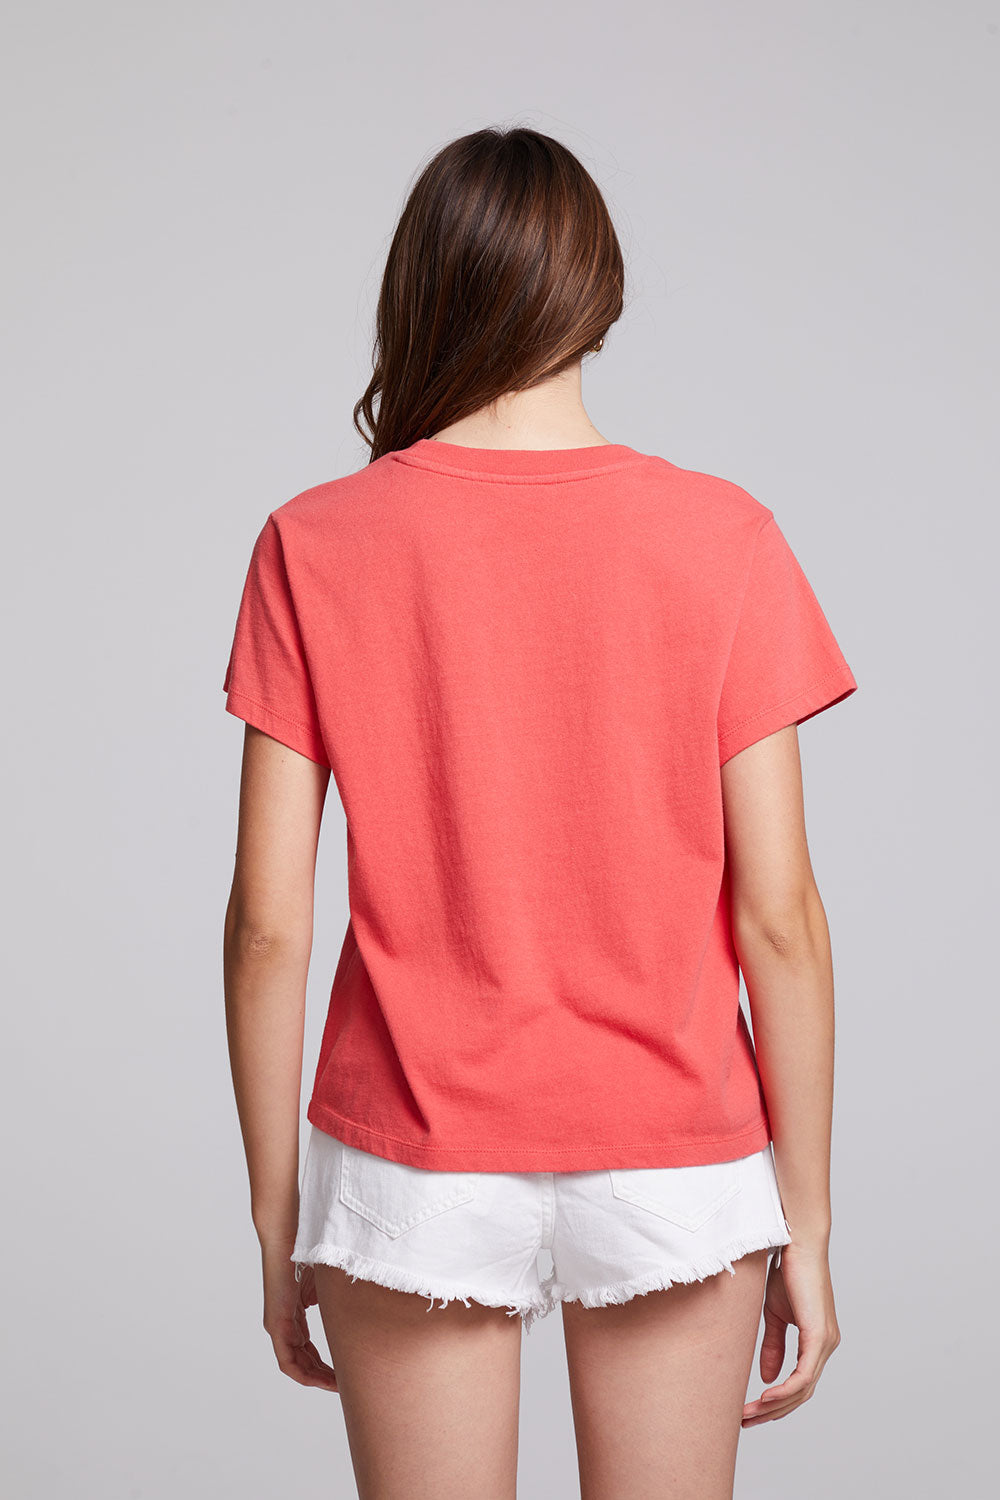 California Palm Tee WOMENS chaserbrand